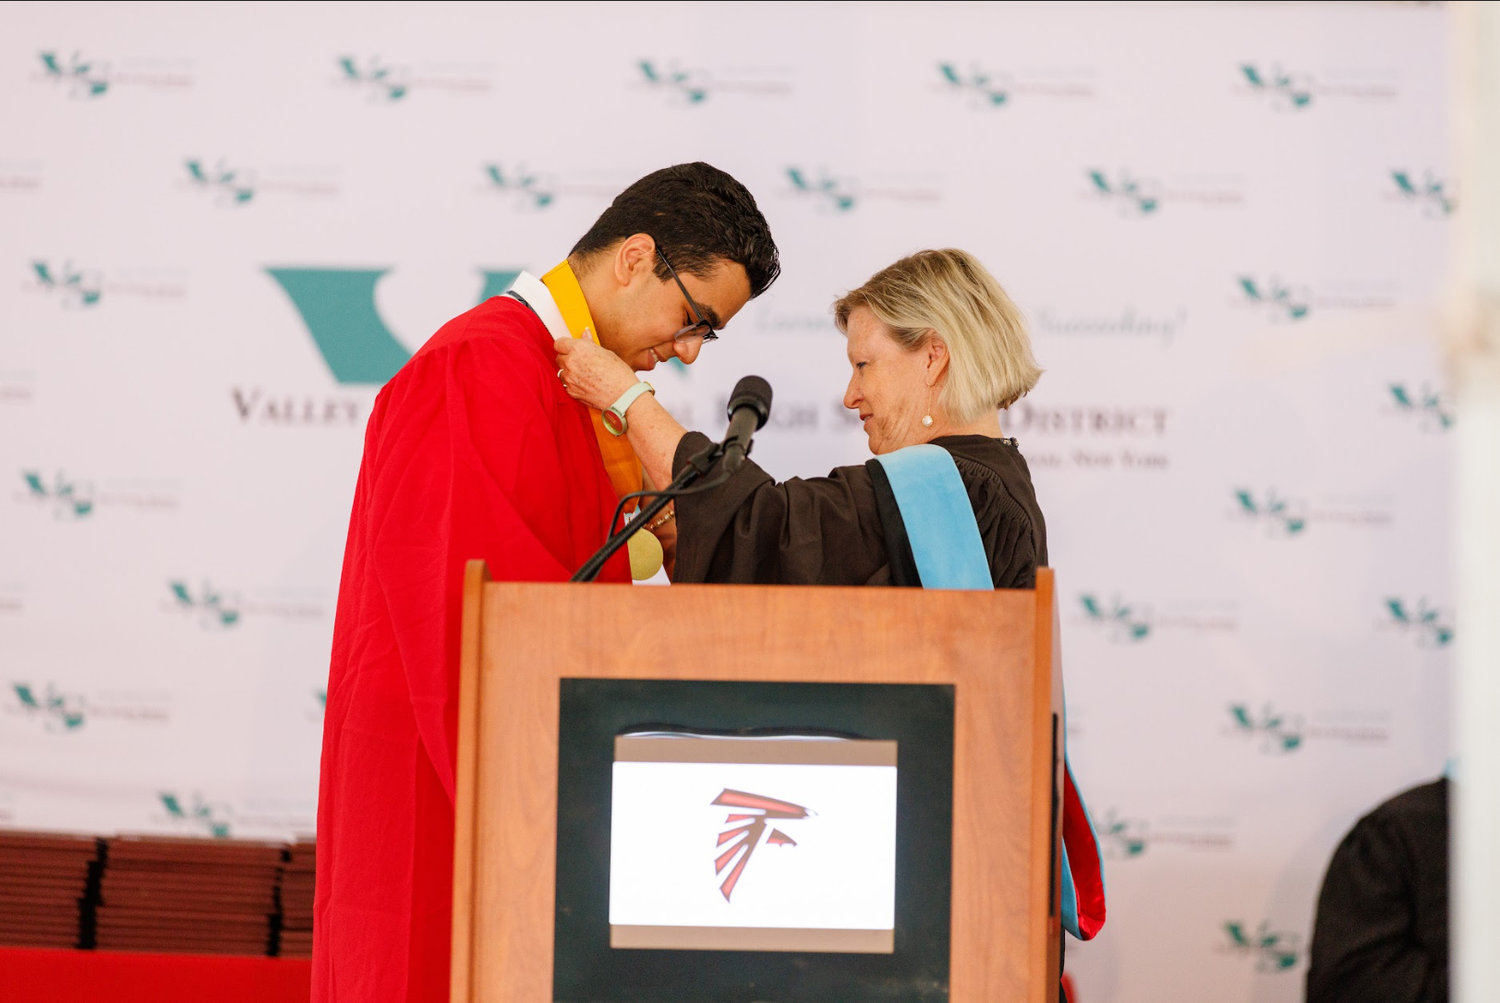 South High valedictorian Sameer Singh received his medal from Principal Maureen Henry.